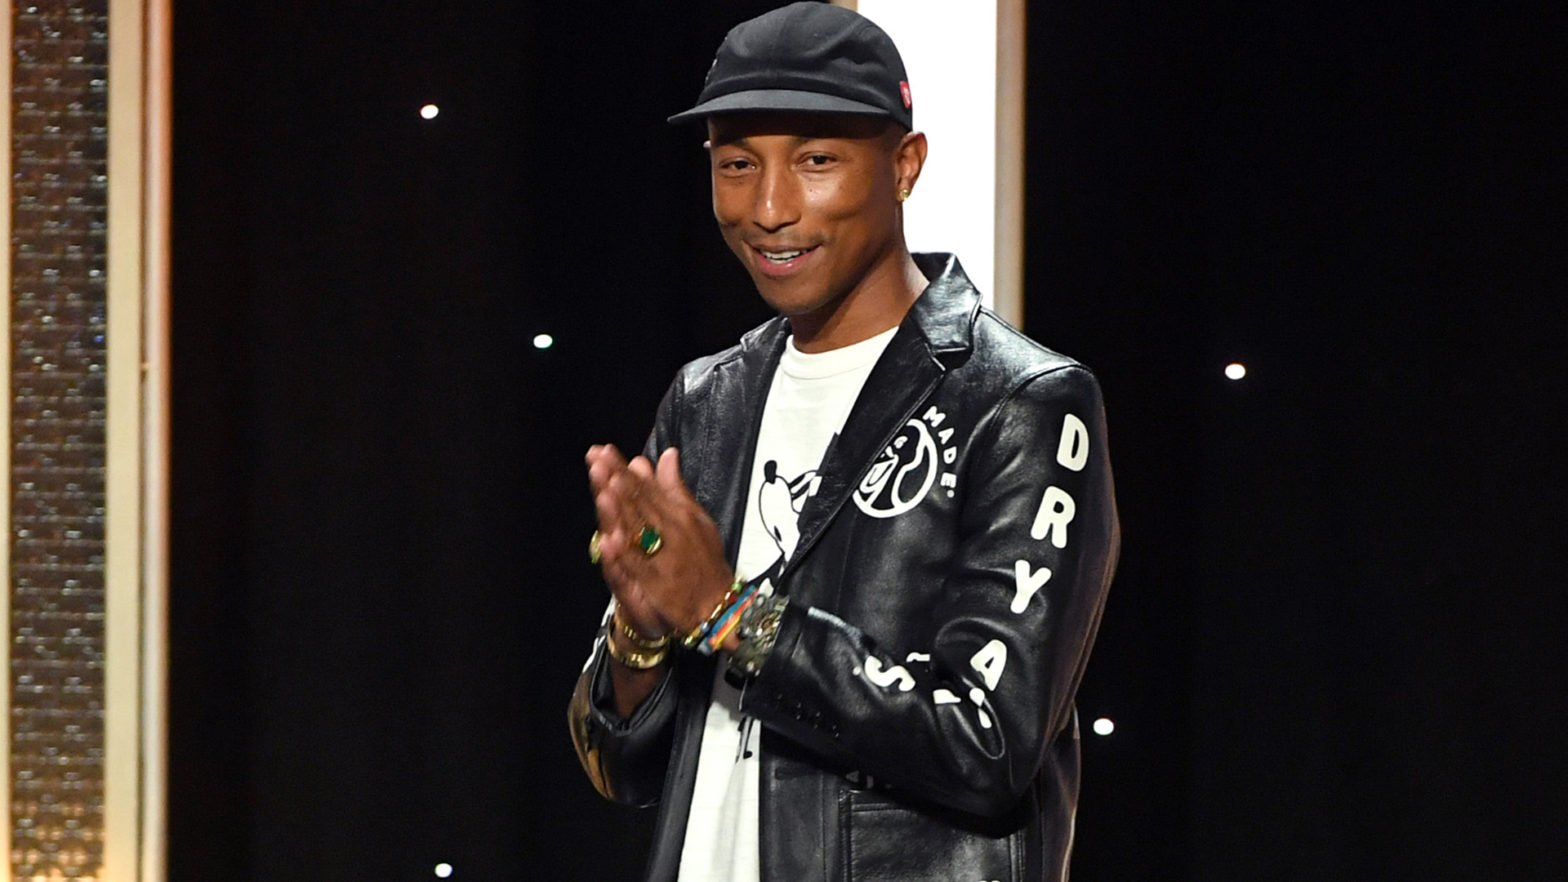 Pharrell Williams' Billionaire Boys Club Joins Forces With Cam Kirk Studios To Open A Creator’s Lab In Atlanta, GA